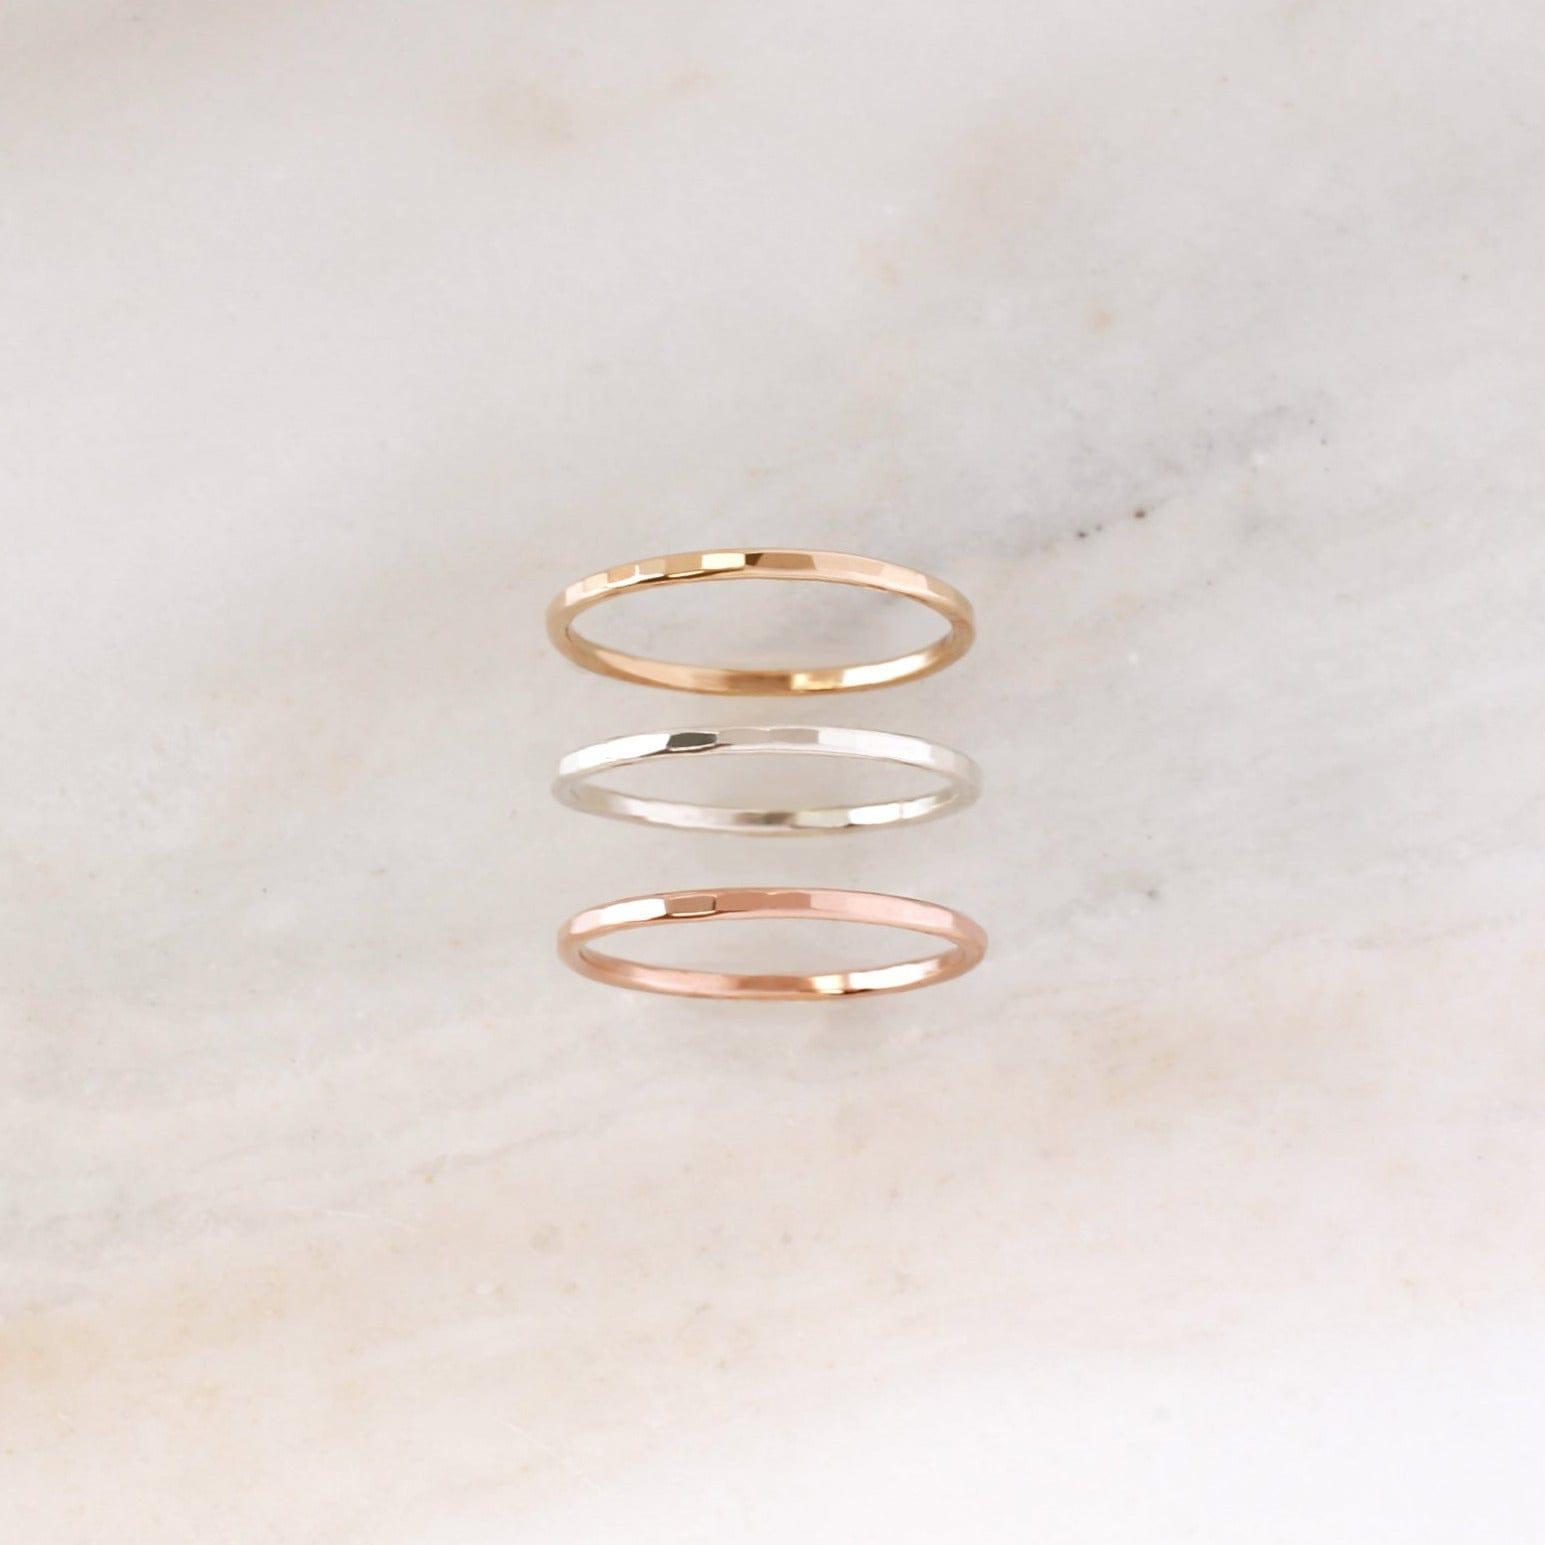 Hammered Stacking Rings - Nolia Jewelry - Meaningful + Sustainably Handcrafted Jewelry